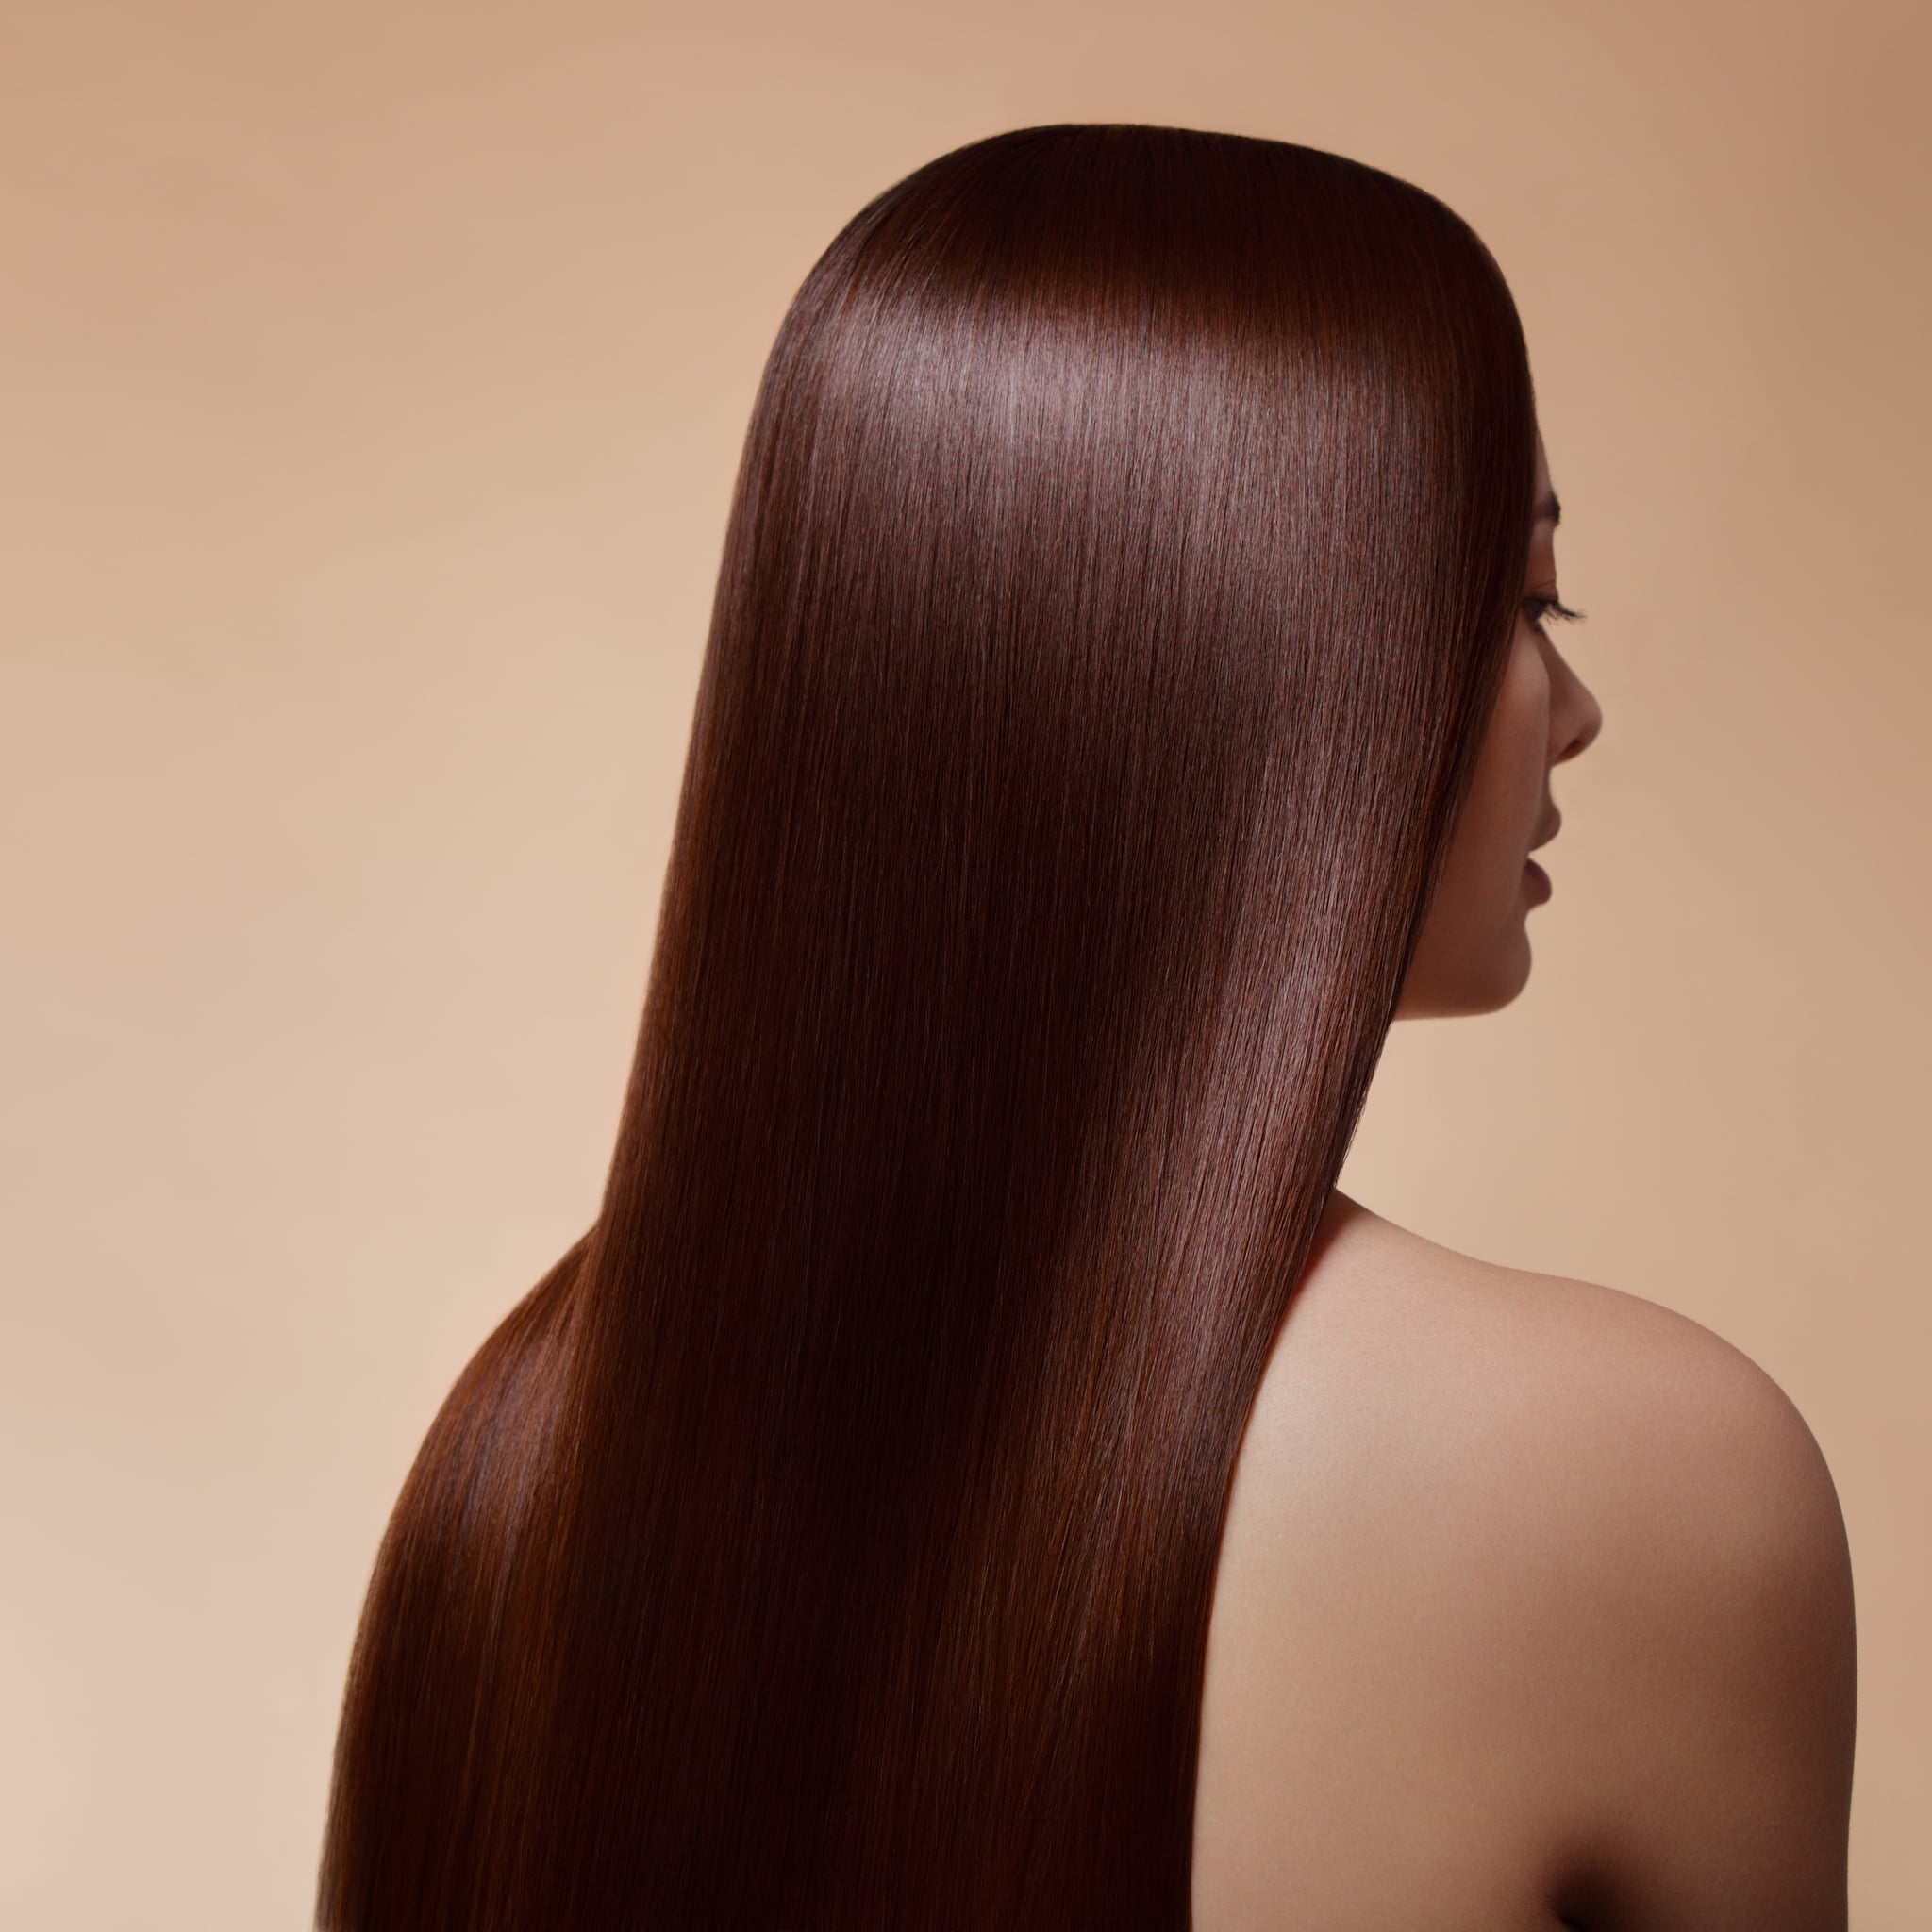 What Is a Glaze For Hair Color? | POPSUGAR Beauty